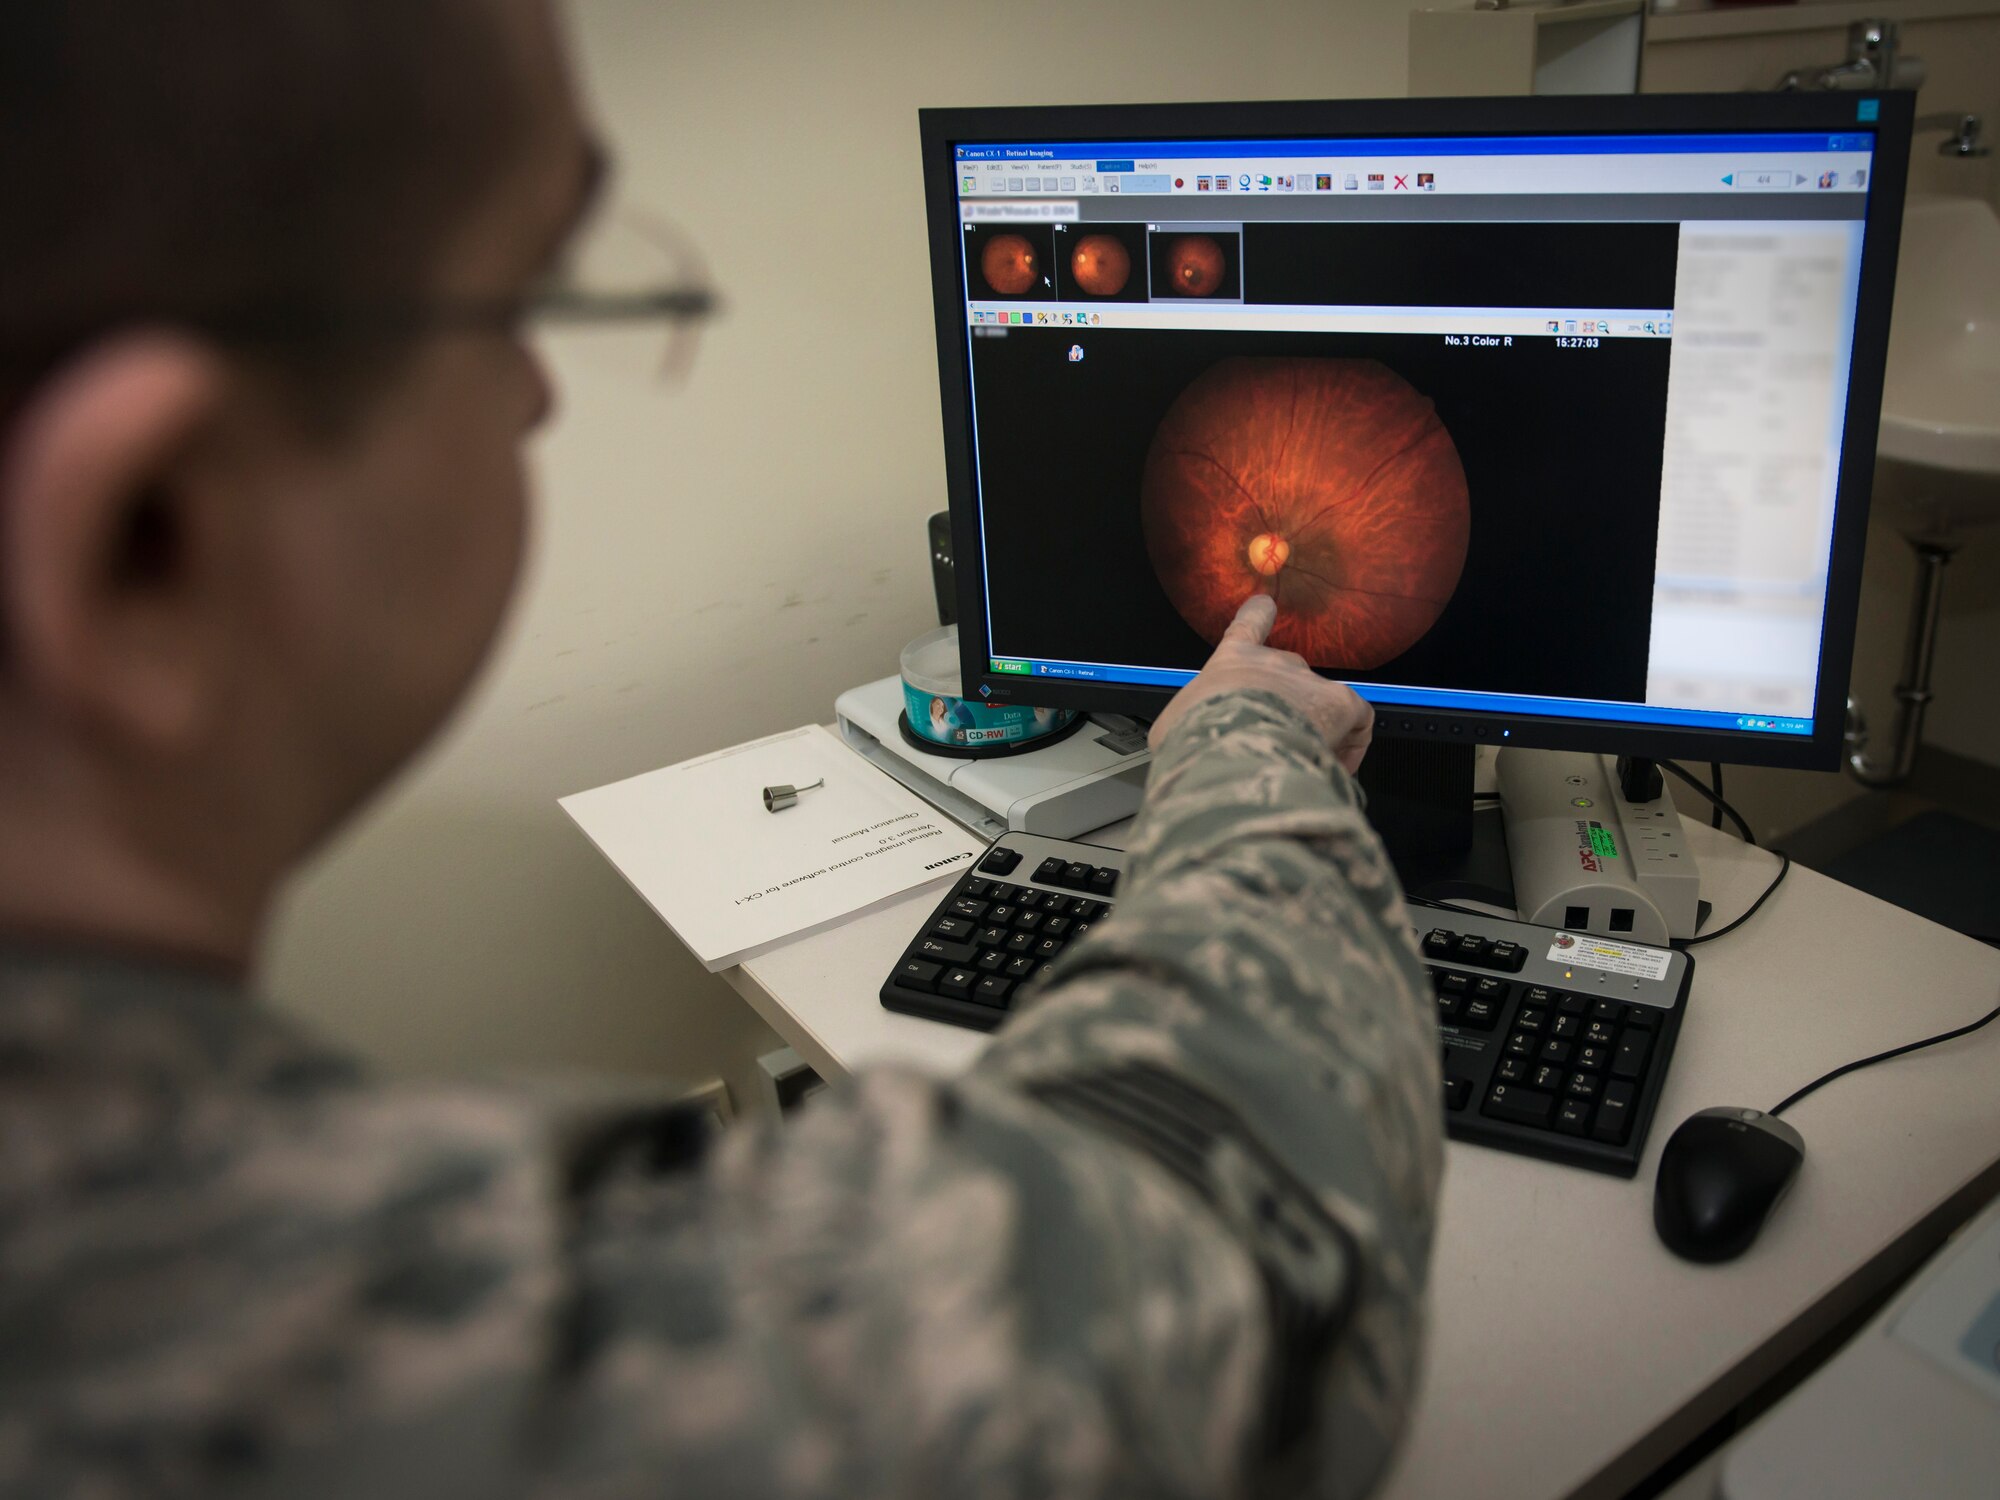 U.S. Air Force Staff Sgt. Christopher Hutchinson, an optometry technician with the 35th Aerospace Medicine Squadron, examines a patient’s retinal scan at Misawa Air Base, Japan, Jan. 21, 2016. “If you can’t see them, you can’t shoot them,” Hutchinson said as he explained the optometry flight’s importance in a service member’s life. In the same way they support the war fighters on the ground down range, they’re also the primary factor in a pilot’s medical clearance to fly. “Without us, they’re literally flying blind,” he said. “People just can’t see without us.” Hutchinson is a Cincinnati, Ohio, native. (U.S. Air Force photo by Staff Sgt. Benjamin W. Stratton)